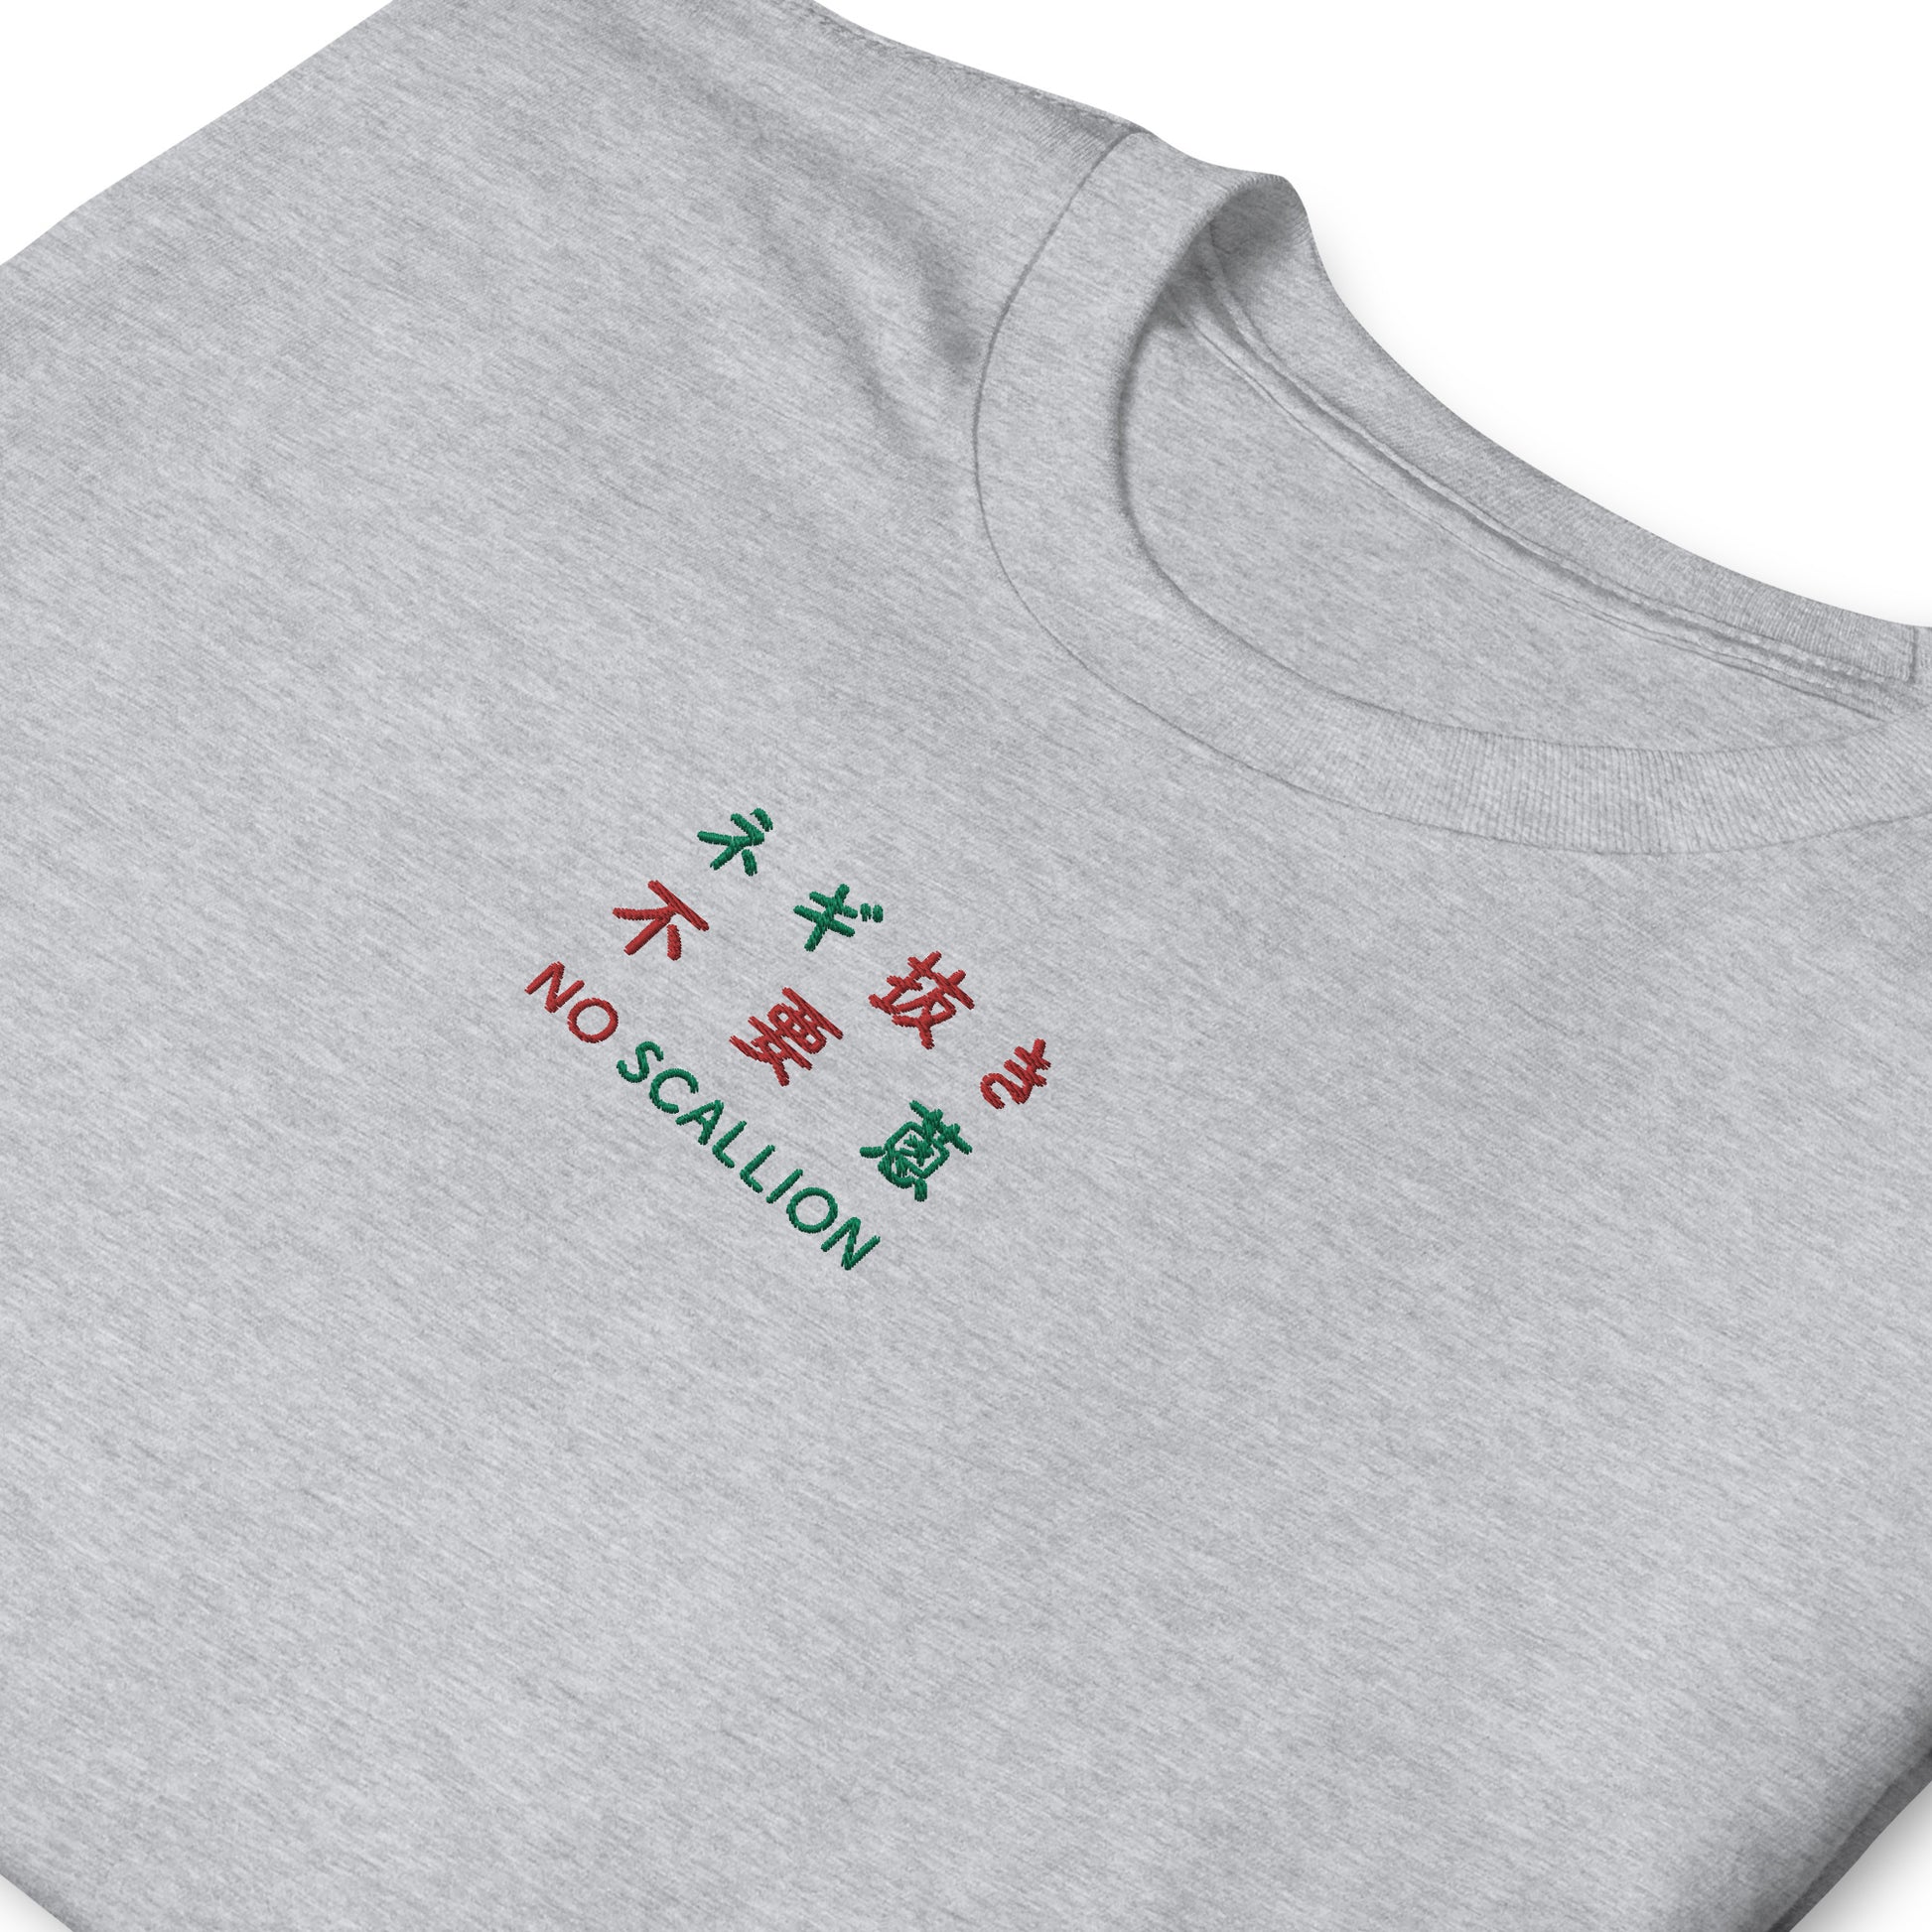 Light Gray High Quality Tee - Front Design with Red/Green Embroidery "NO SCALLIONit" in English, Japanese and Chinese